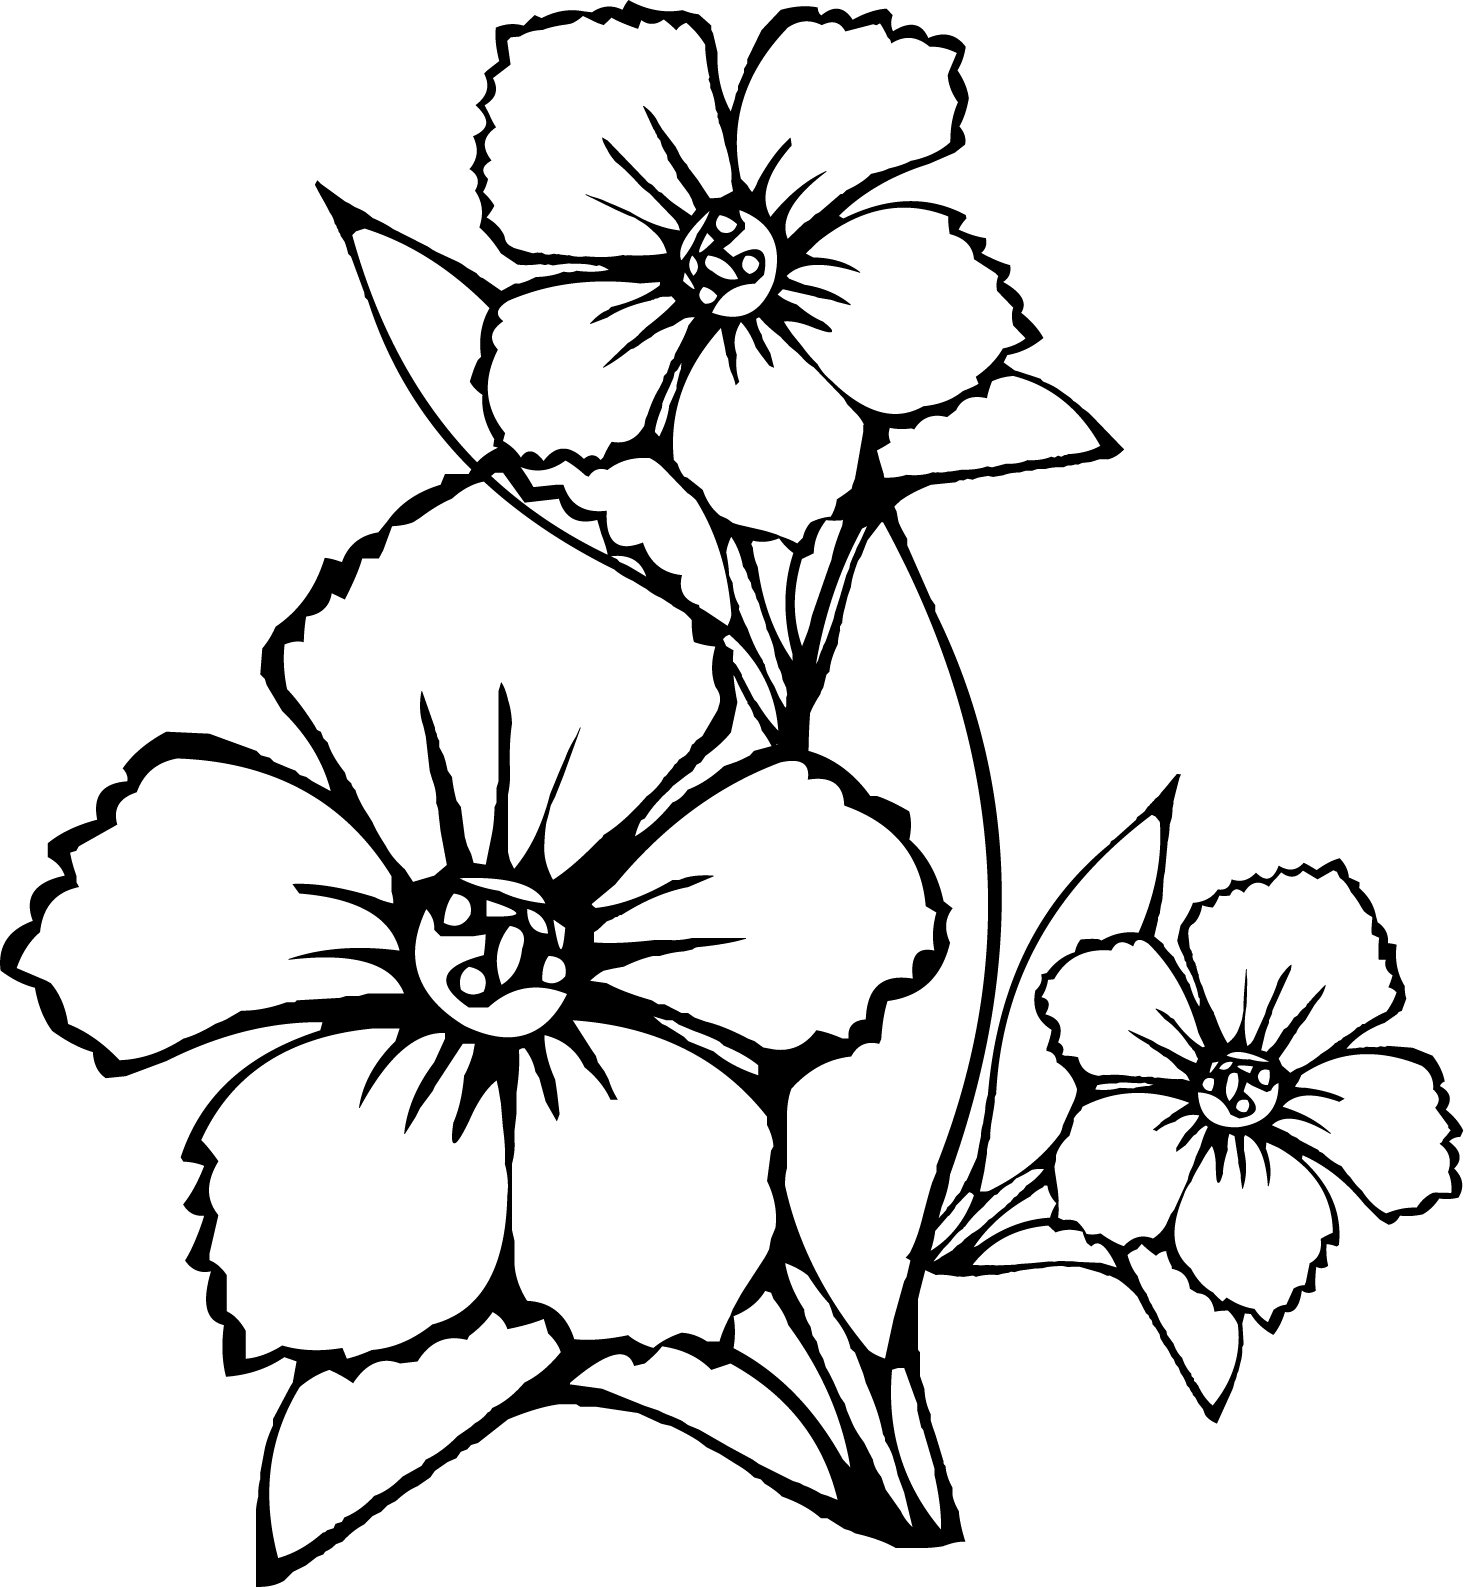 flower coloring pages, free coloring print pages, geometric coloring pages